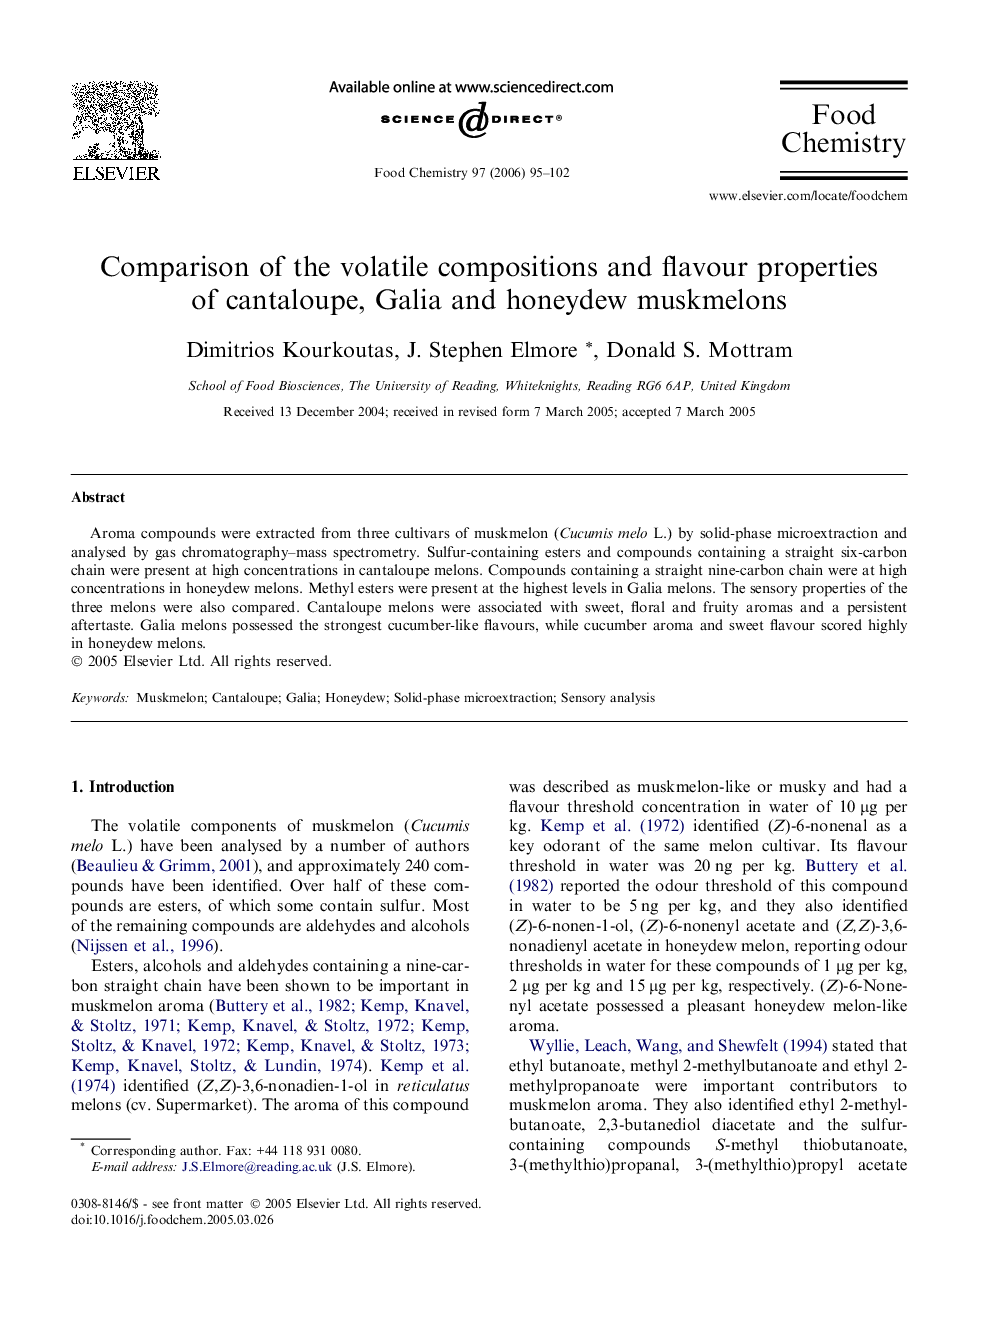 Comparison of the volatile compositions and flavour properties of cantaloupe, Galia and honeydew muskmelons